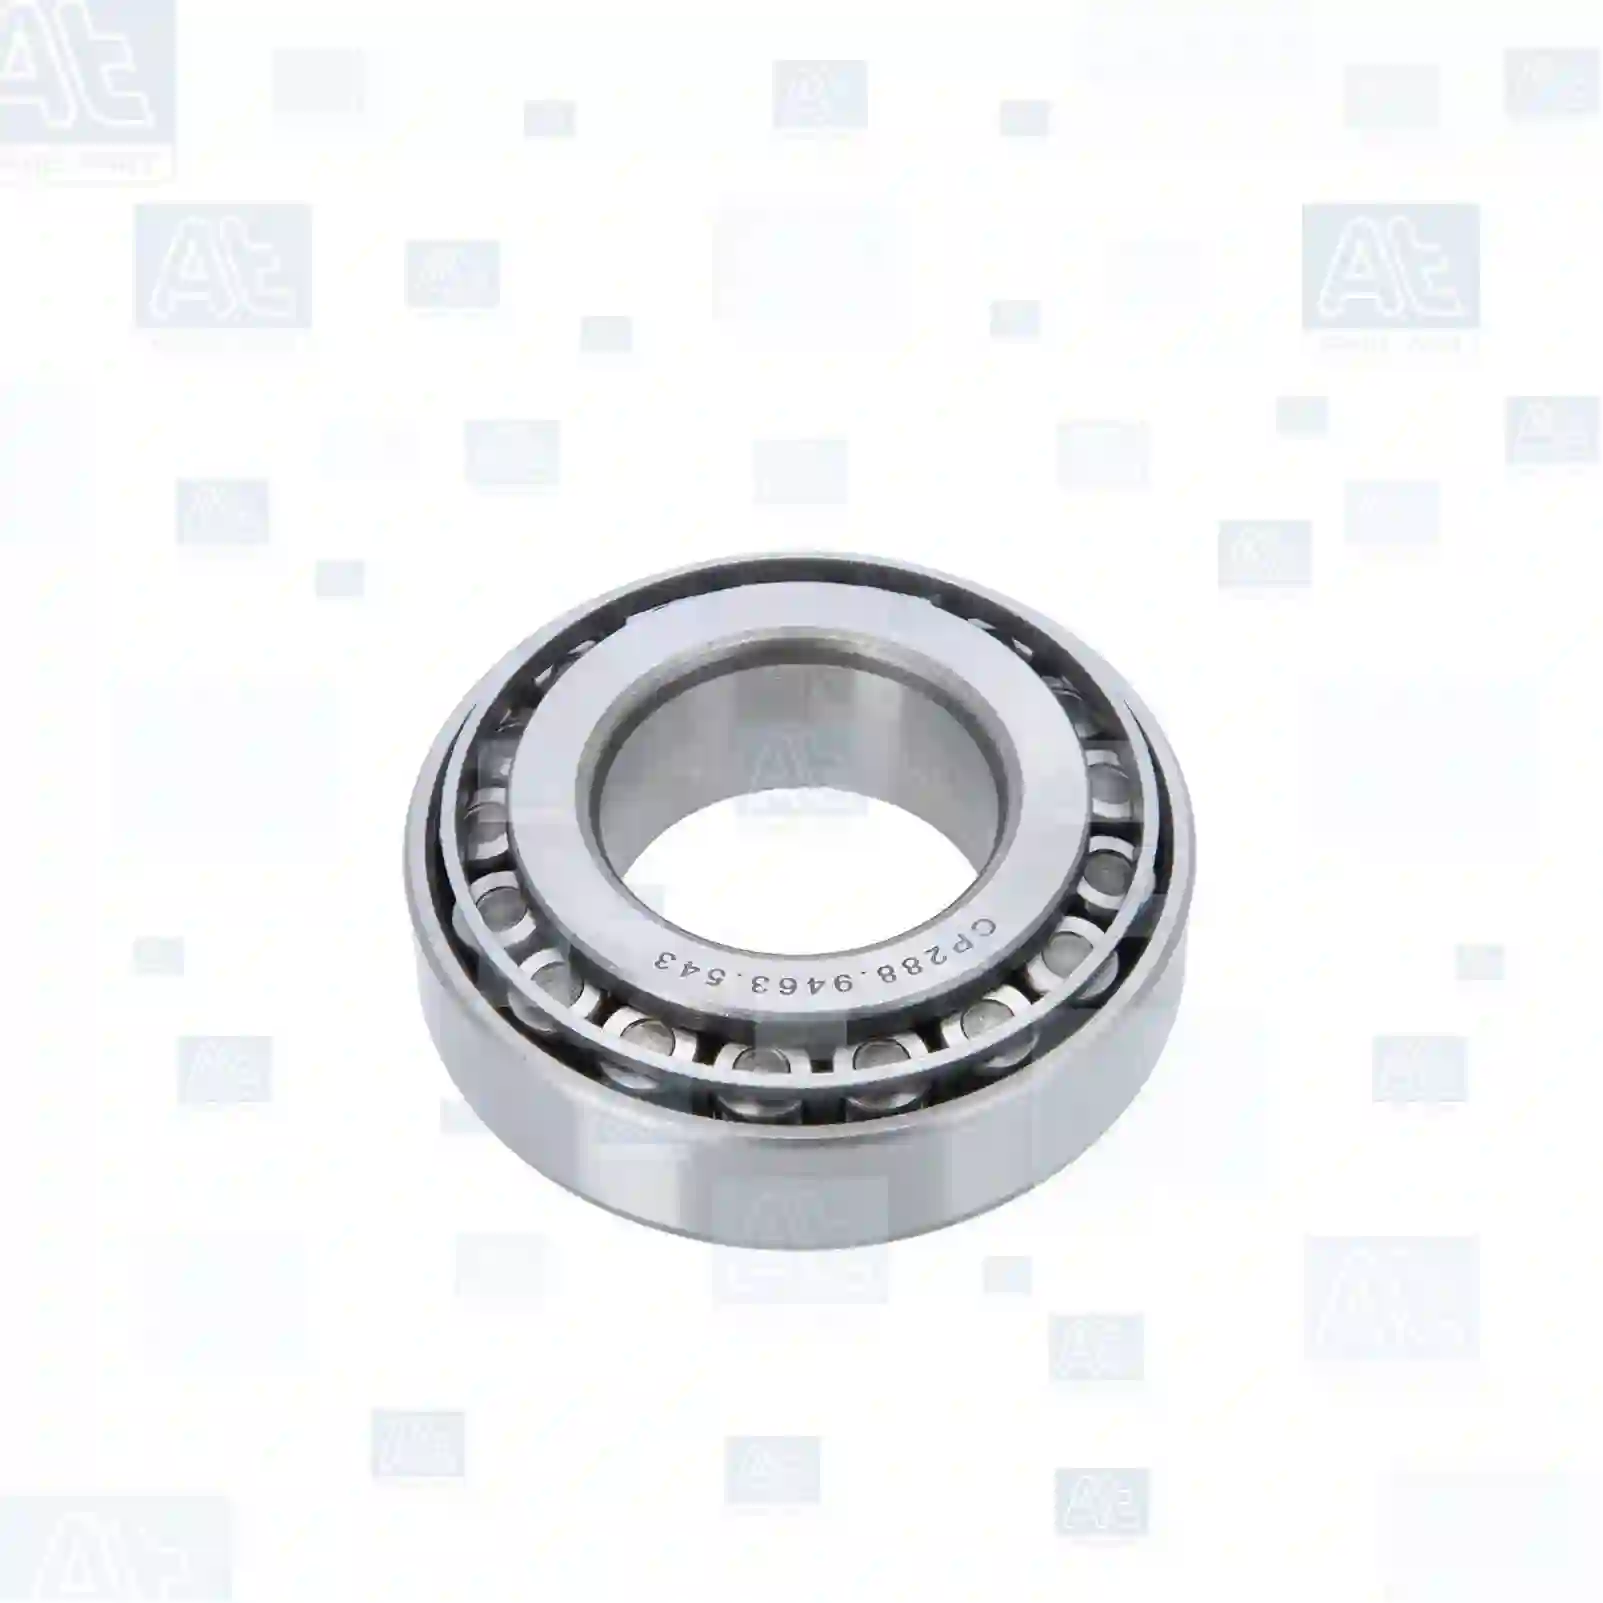 Tapered roller bearing, 77725069, 0014554, 14554, 0001440642X1, 004207725000, 005090157, 1440642X1, 4207725, TK4207725000, 01110002, 26800140, 10500474, 710500474, 8-94248078-0, 01110002, 07164502, 08560451, 08850841, 26800140, 3612944000, 503644293, 60144280, 93804619, 93806251, 823632208, 06324890080, 06324990062, 06324990063, 81934200055, 81934200246, 0039813805, 0039819405, 0159813405, 0159813805, 0159815605, 0169813505, 0169817205, MB025005, 40210-76000, 40210-9X60A, 0023432208, 0773220800, 0959232208, 5516014042, 5516014518, 5516014554, 214104, 183763, 7011093 ||  77725069 At Spare Part | Engine, Accelerator Pedal, Camshaft, Connecting Rod, Crankcase, Crankshaft, Cylinder Head, Engine Suspension Mountings, Exhaust Manifold, Exhaust Gas Recirculation, Filter Kits, Flywheel Housing, General Overhaul Kits, Engine, Intake Manifold, Oil Cleaner, Oil Cooler, Oil Filter, Oil Pump, Oil Sump, Piston & Liner, Sensor & Switch, Timing Case, Turbocharger, Cooling System, Belt Tensioner, Coolant Filter, Coolant Pipe, Corrosion Prevention Agent, Drive, Expansion Tank, Fan, Intercooler, Monitors & Gauges, Radiator, Thermostat, V-Belt / Timing belt, Water Pump, Fuel System, Electronical Injector Unit, Feed Pump, Fuel Filter, cpl., Fuel Gauge Sender,  Fuel Line, Fuel Pump, Fuel Tank, Injection Line Kit, Injection Pump, Exhaust System, Clutch & Pedal, Gearbox, Propeller Shaft, Axles, Brake System, Hubs & Wheels, Suspension, Leaf Spring, Universal Parts / Accessories, Steering, Electrical System, Cabin Tapered roller bearing, 77725069, 0014554, 14554, 0001440642X1, 004207725000, 005090157, 1440642X1, 4207725, TK4207725000, 01110002, 26800140, 10500474, 710500474, 8-94248078-0, 01110002, 07164502, 08560451, 08850841, 26800140, 3612944000, 503644293, 60144280, 93804619, 93806251, 823632208, 06324890080, 06324990062, 06324990063, 81934200055, 81934200246, 0039813805, 0039819405, 0159813405, 0159813805, 0159815605, 0169813505, 0169817205, MB025005, 40210-76000, 40210-9X60A, 0023432208, 0773220800, 0959232208, 5516014042, 5516014518, 5516014554, 214104, 183763, 7011093 ||  77725069 At Spare Part | Engine, Accelerator Pedal, Camshaft, Connecting Rod, Crankcase, Crankshaft, Cylinder Head, Engine Suspension Mountings, Exhaust Manifold, Exhaust Gas Recirculation, Filter Kits, Flywheel Housing, General Overhaul Kits, Engine, Intake Manifold, Oil Cleaner, Oil Cooler, Oil Filter, Oil Pump, Oil Sump, Piston & Liner, Sensor & Switch, Timing Case, Turbocharger, Cooling System, Belt Tensioner, Coolant Filter, Coolant Pipe, Corrosion Prevention Agent, Drive, Expansion Tank, Fan, Intercooler, Monitors & Gauges, Radiator, Thermostat, V-Belt / Timing belt, Water Pump, Fuel System, Electronical Injector Unit, Feed Pump, Fuel Filter, cpl., Fuel Gauge Sender,  Fuel Line, Fuel Pump, Fuel Tank, Injection Line Kit, Injection Pump, Exhaust System, Clutch & Pedal, Gearbox, Propeller Shaft, Axles, Brake System, Hubs & Wheels, Suspension, Leaf Spring, Universal Parts / Accessories, Steering, Electrical System, Cabin